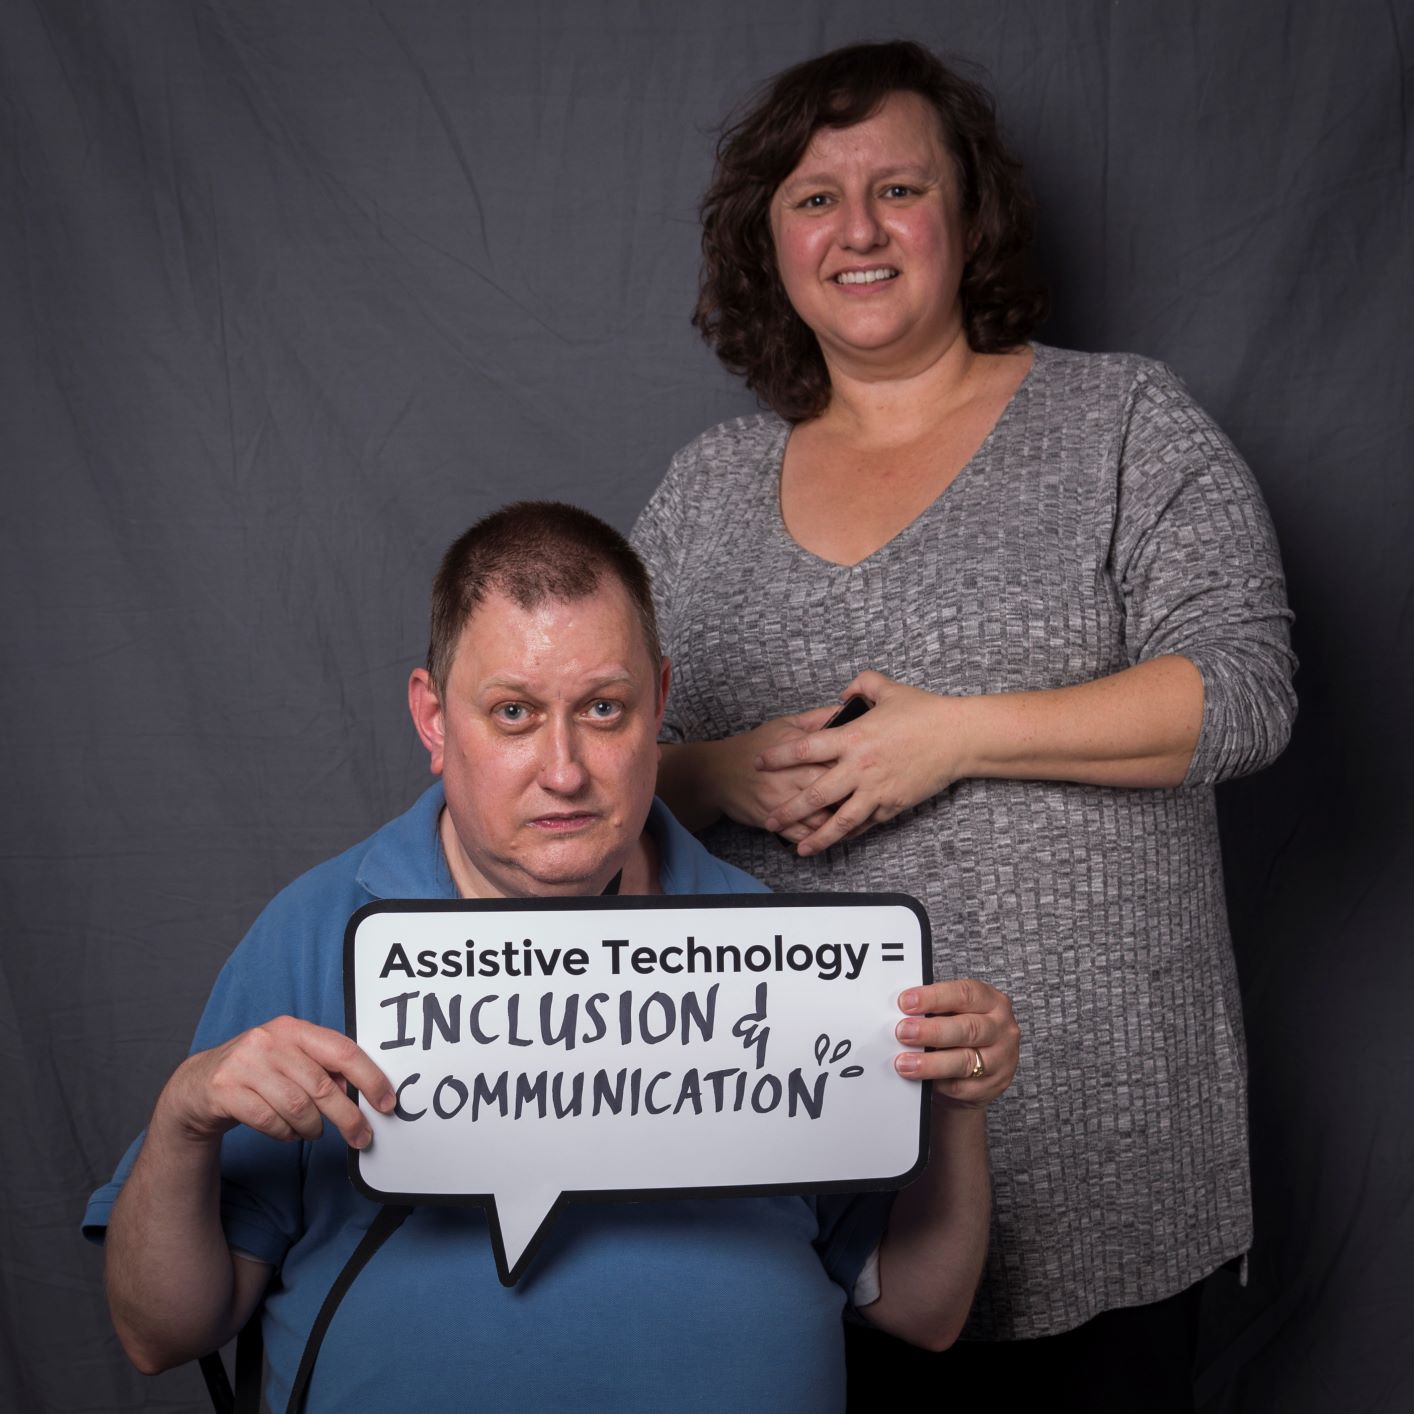 a woman stands behind a seated man holding a speech bubble sign that reads assistive technology = inclusion and communication